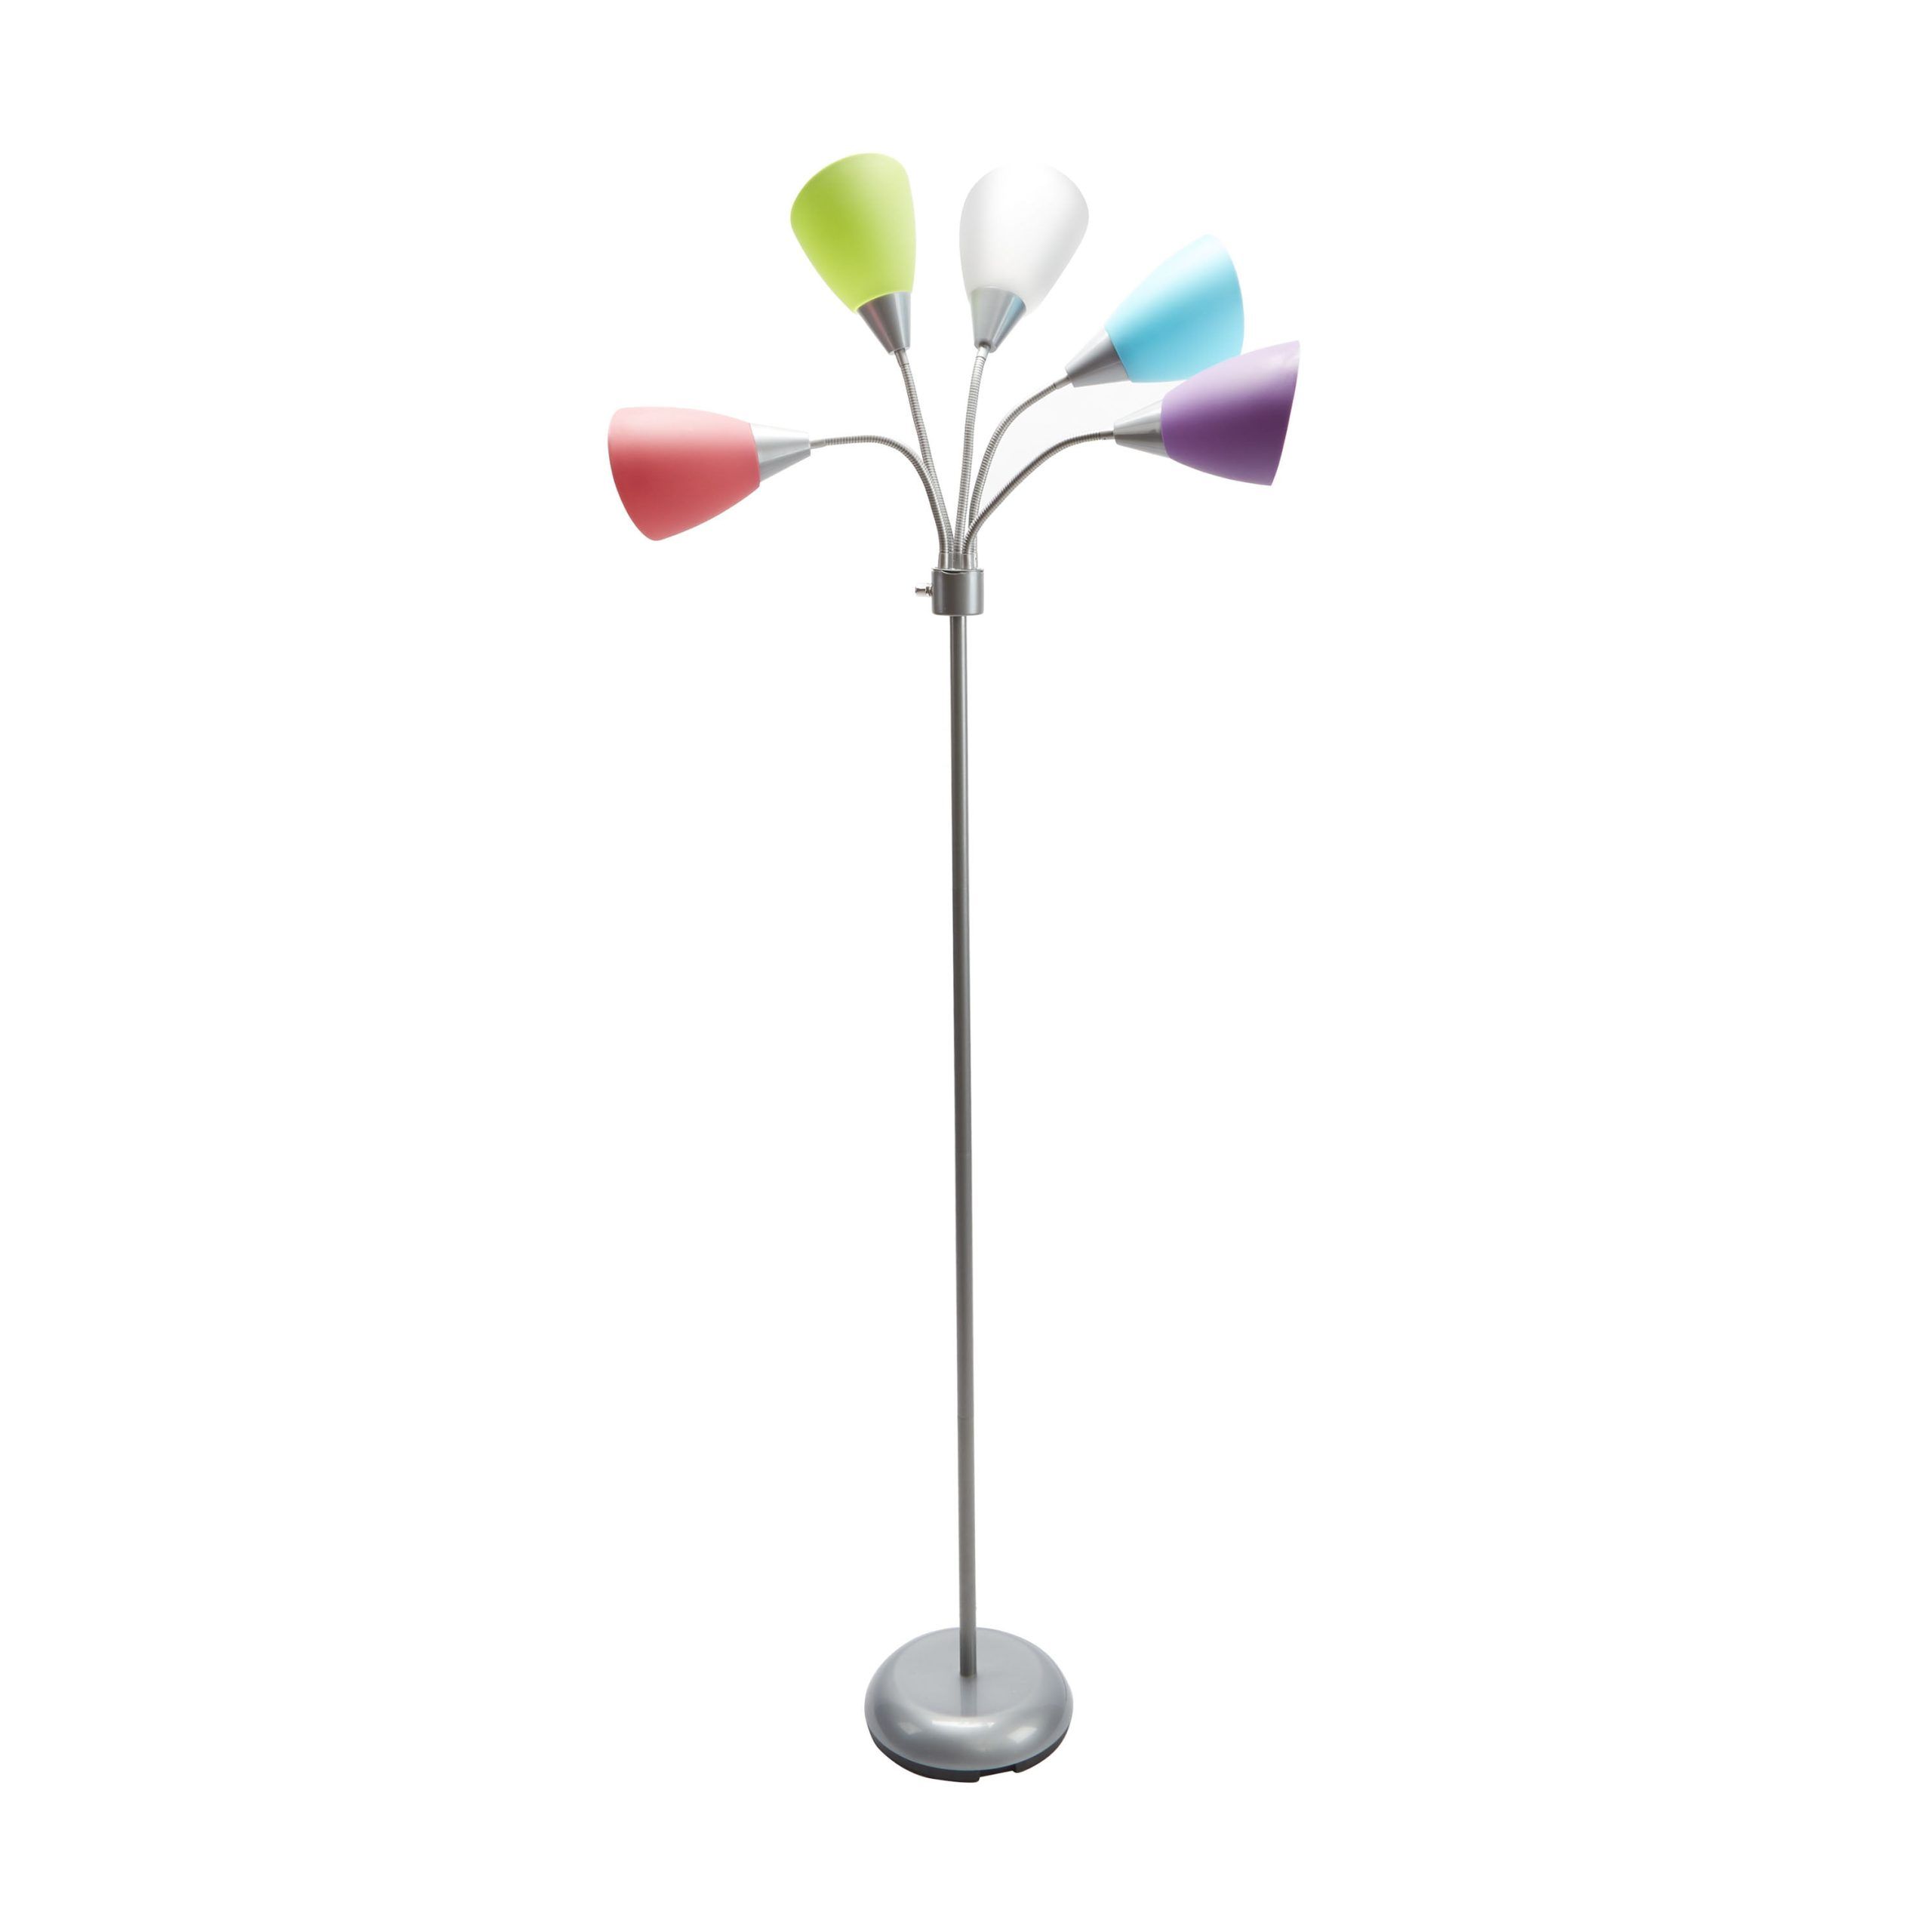 5 Light Standing Lamps Intended For 2019 Mainstays 5 Light Floor Lamp, Silver Color With Multi Color Shades Made Of  Metal – Walmart (View 7 of 15)